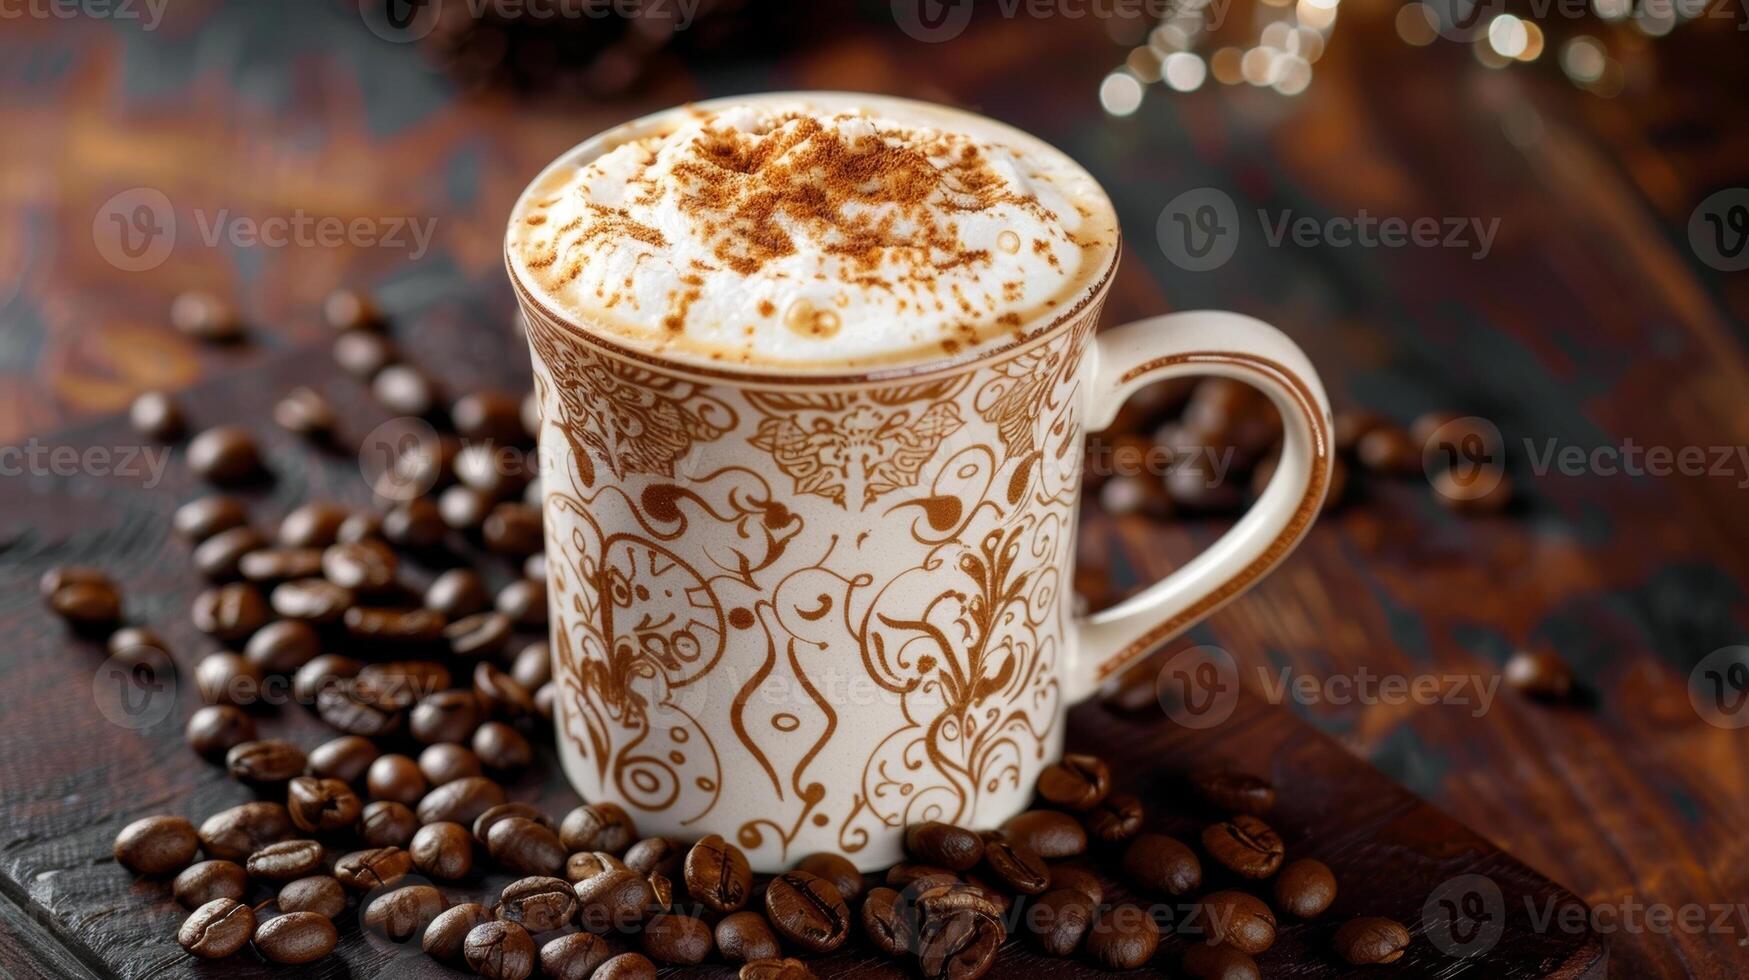 A mug with delicate patterns on it filled with frothy cappuccino and surrounded by tered coffee beans photo